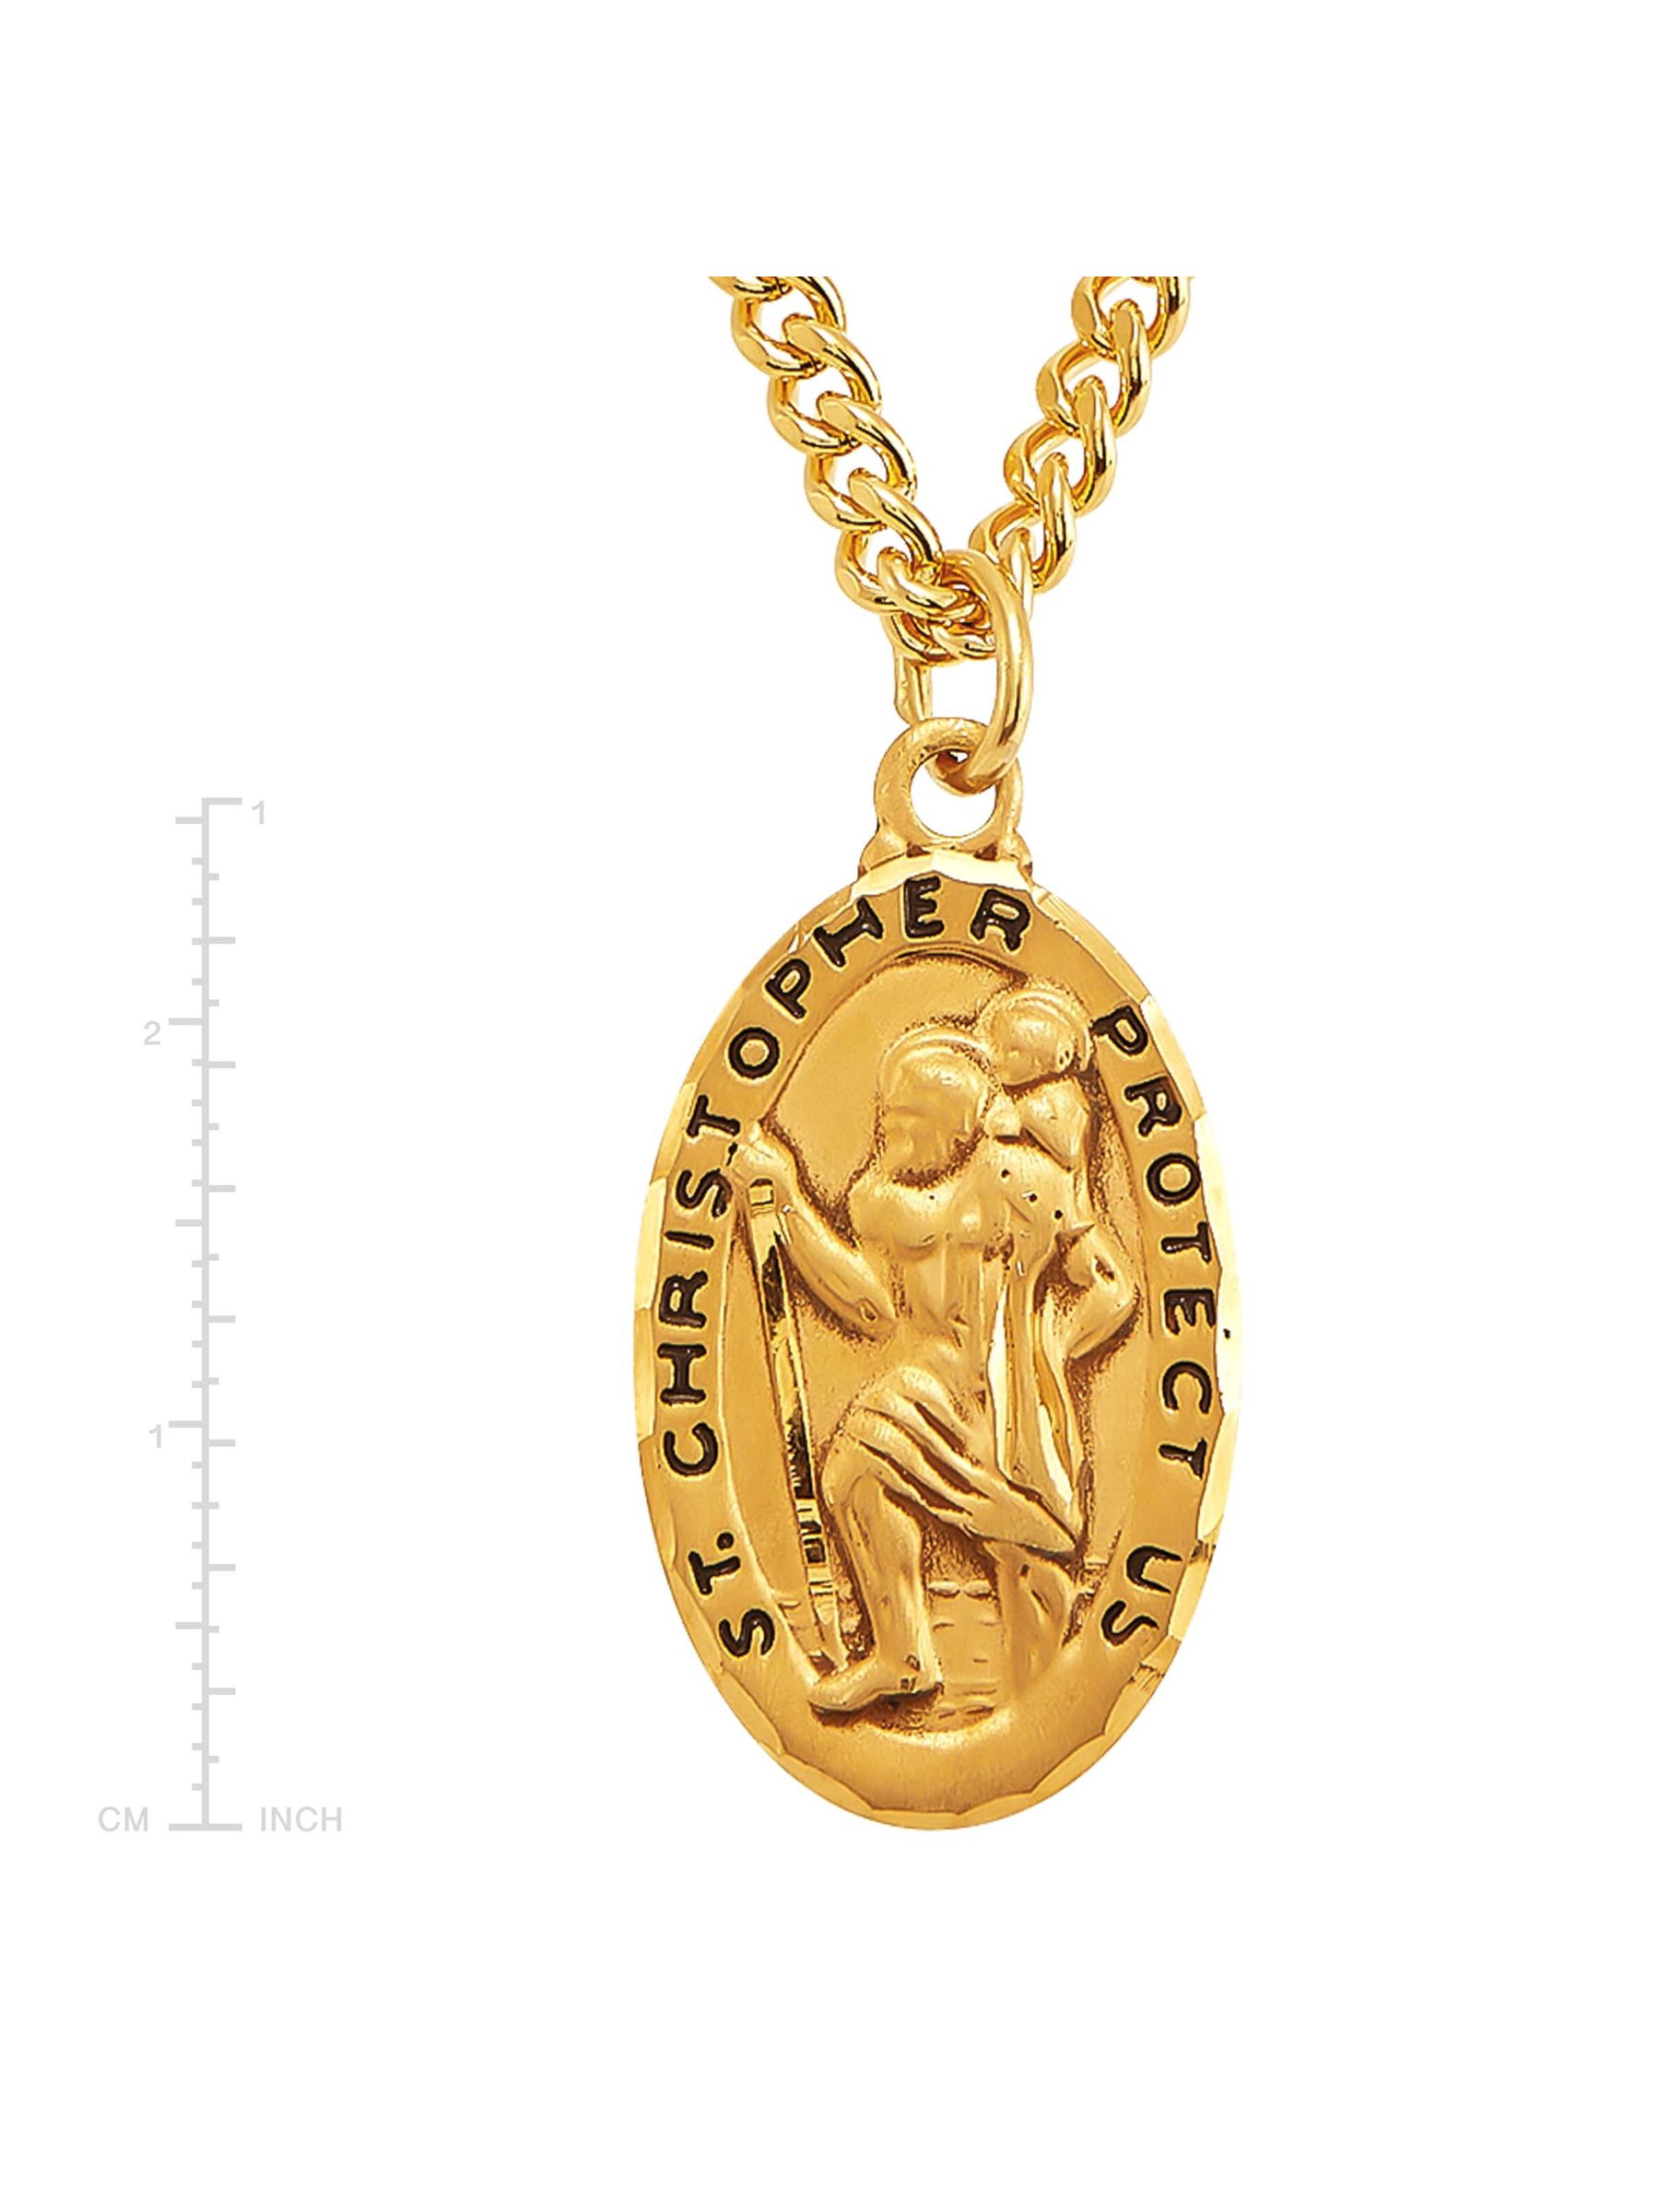 Finecraft 'St. Christopher Medallion Necklace' in Gold-Plated Sterling Silver & Stainless Steel, 24" - image 3 of 5